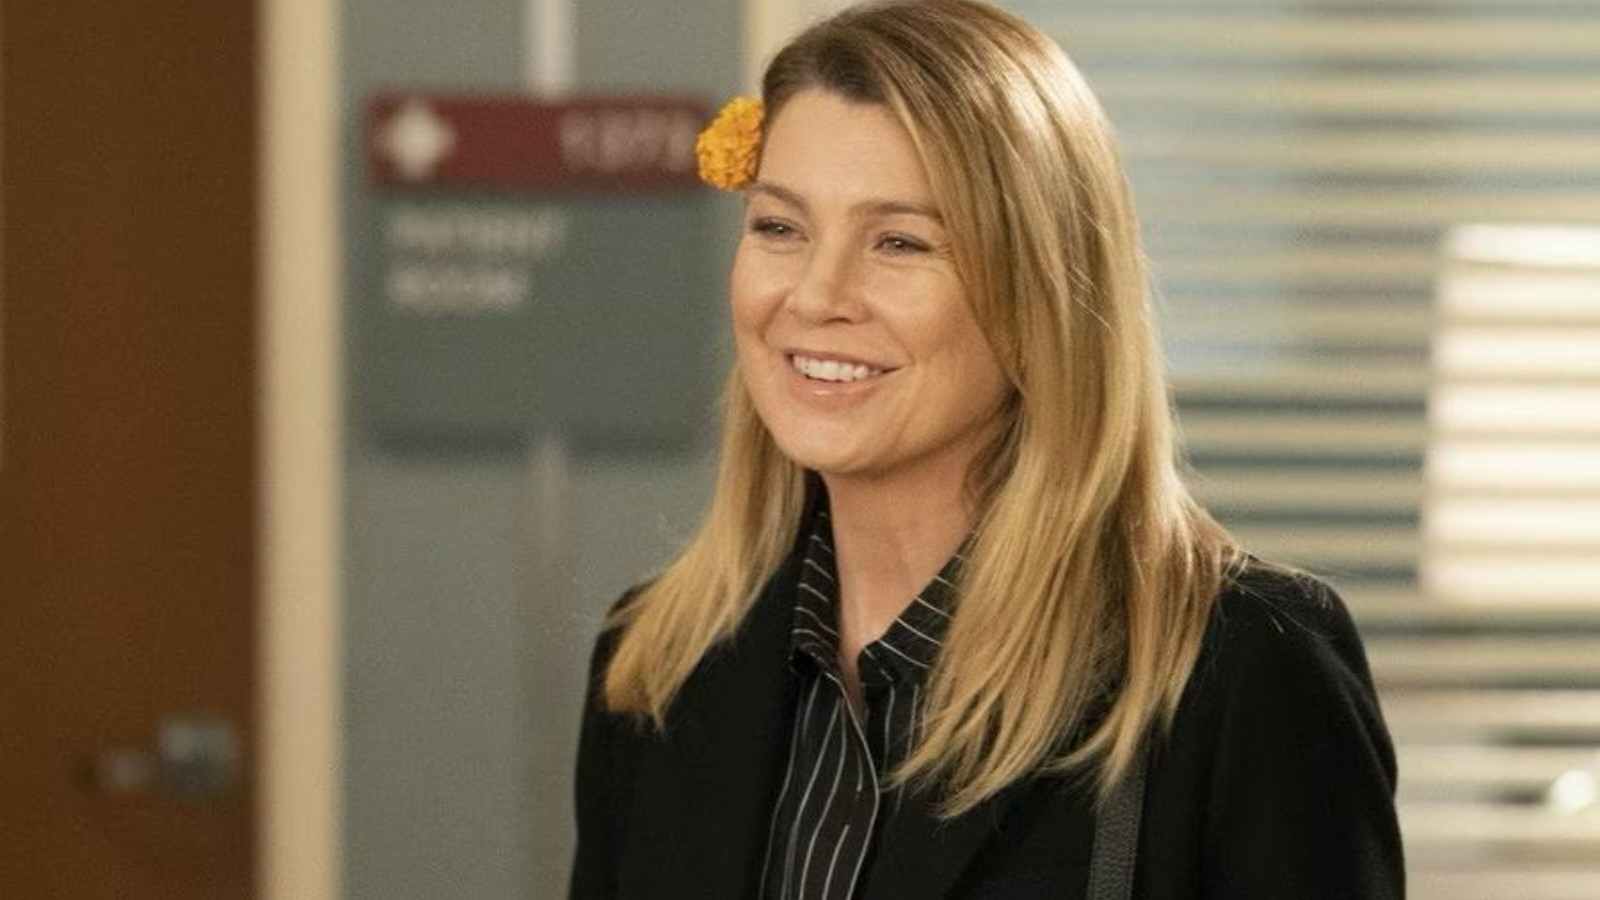 Twitter reacts to the upcoming departure of Ellen Pompeo from 'Grey's Anatomy'